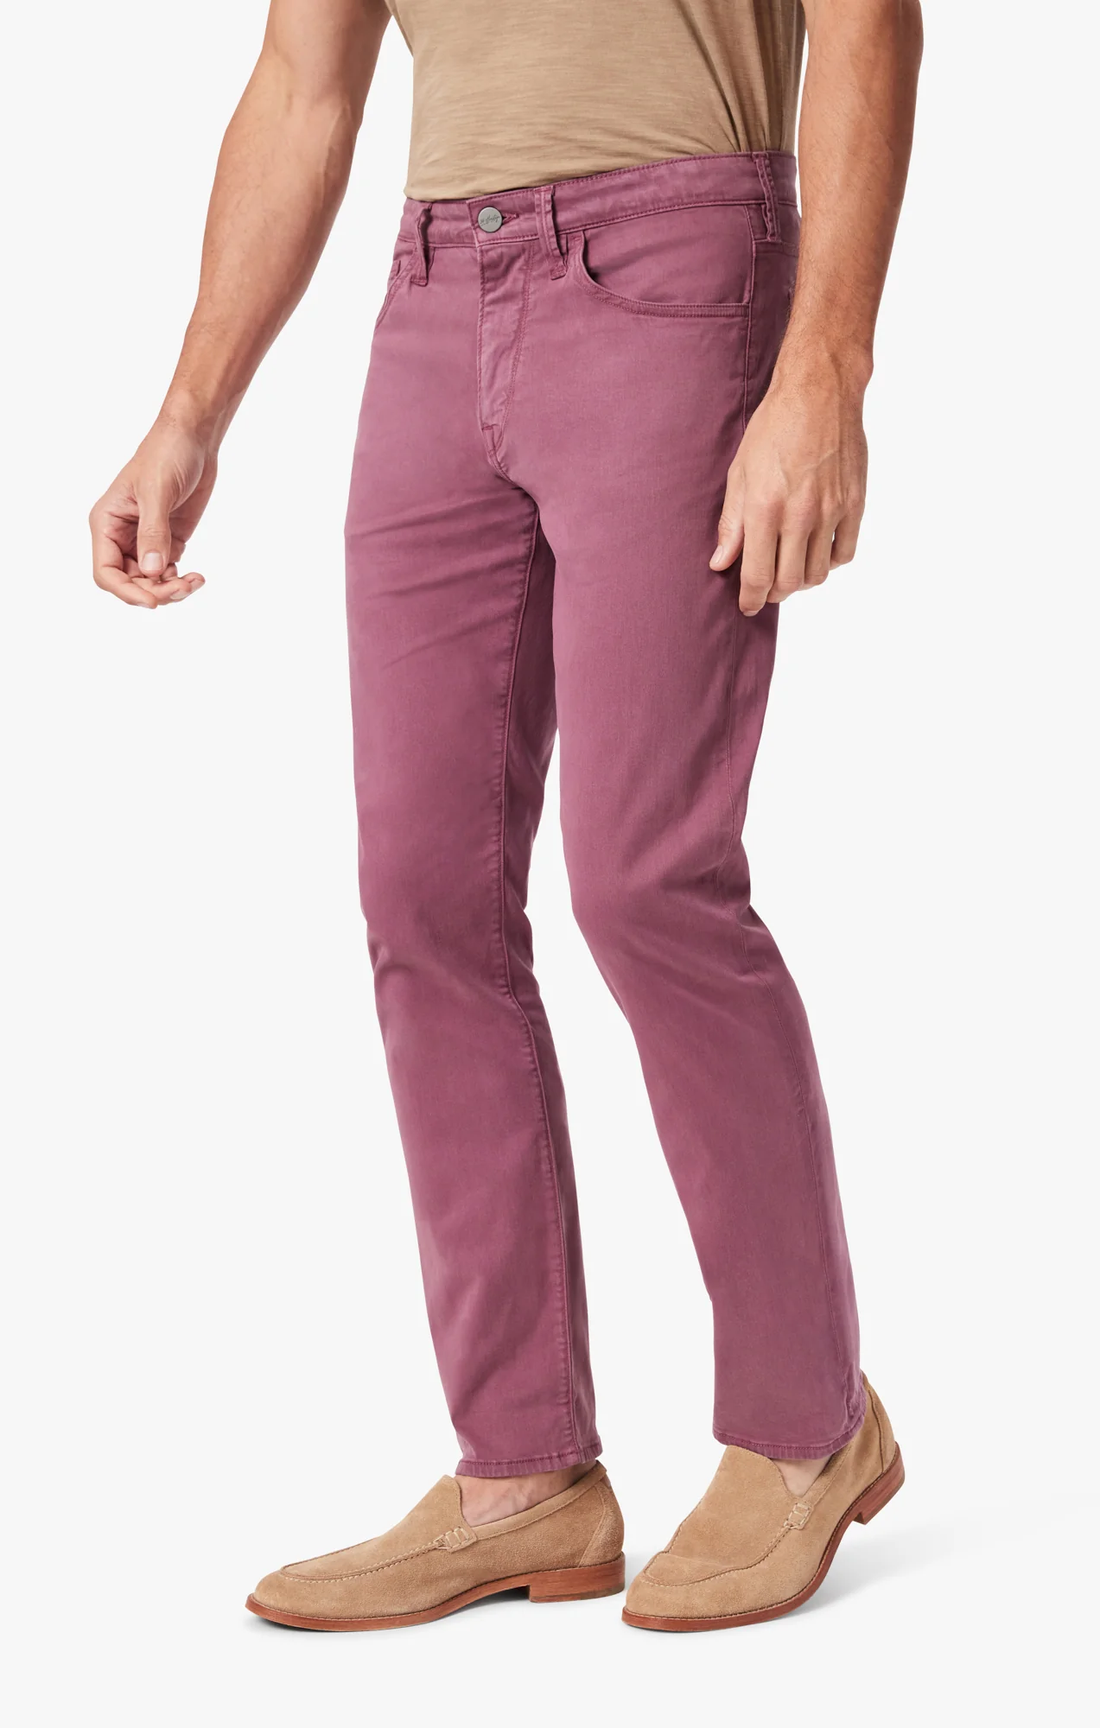 Courage Twill Pants